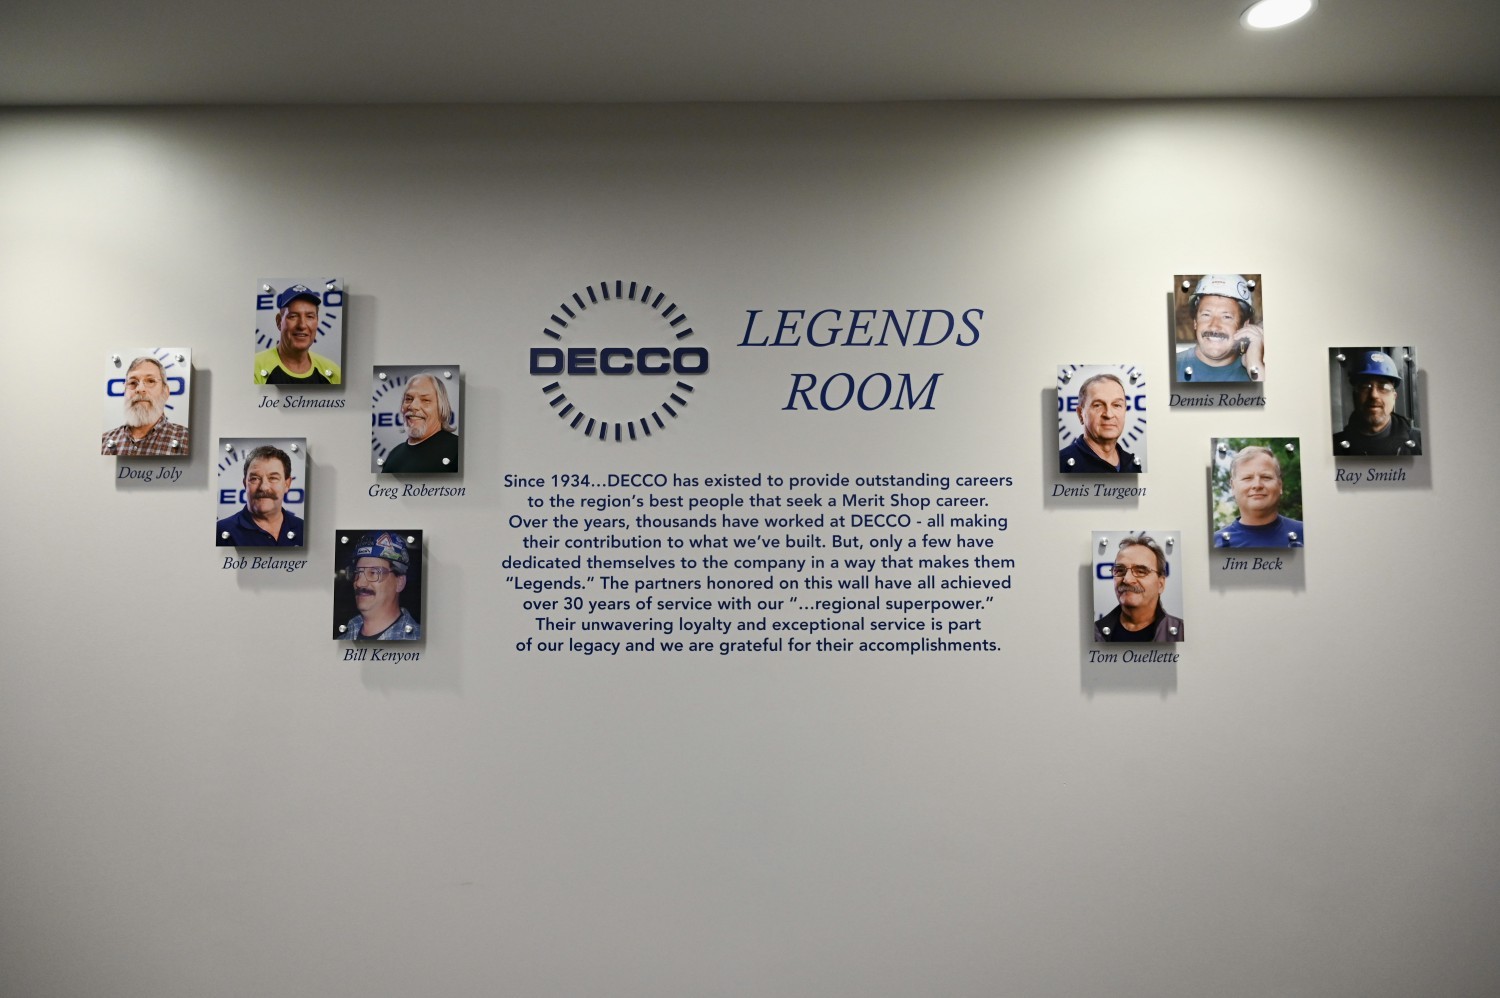 DECCO's Legion Room honoring employee-partners with over 30 years of service.